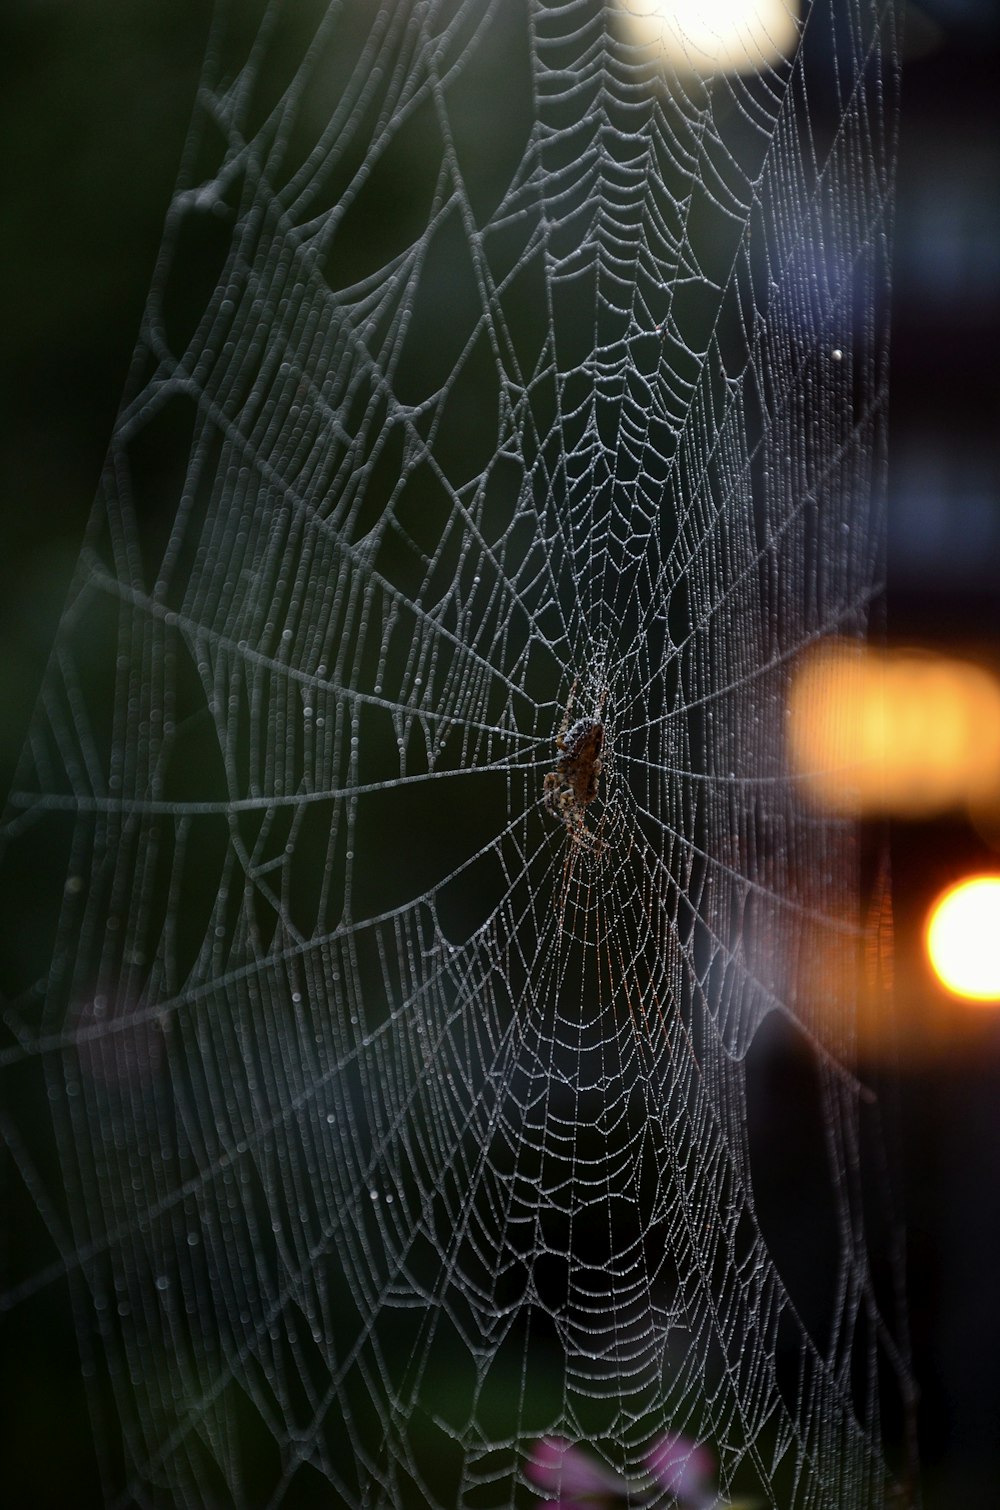 spider web in close up photography during daytime